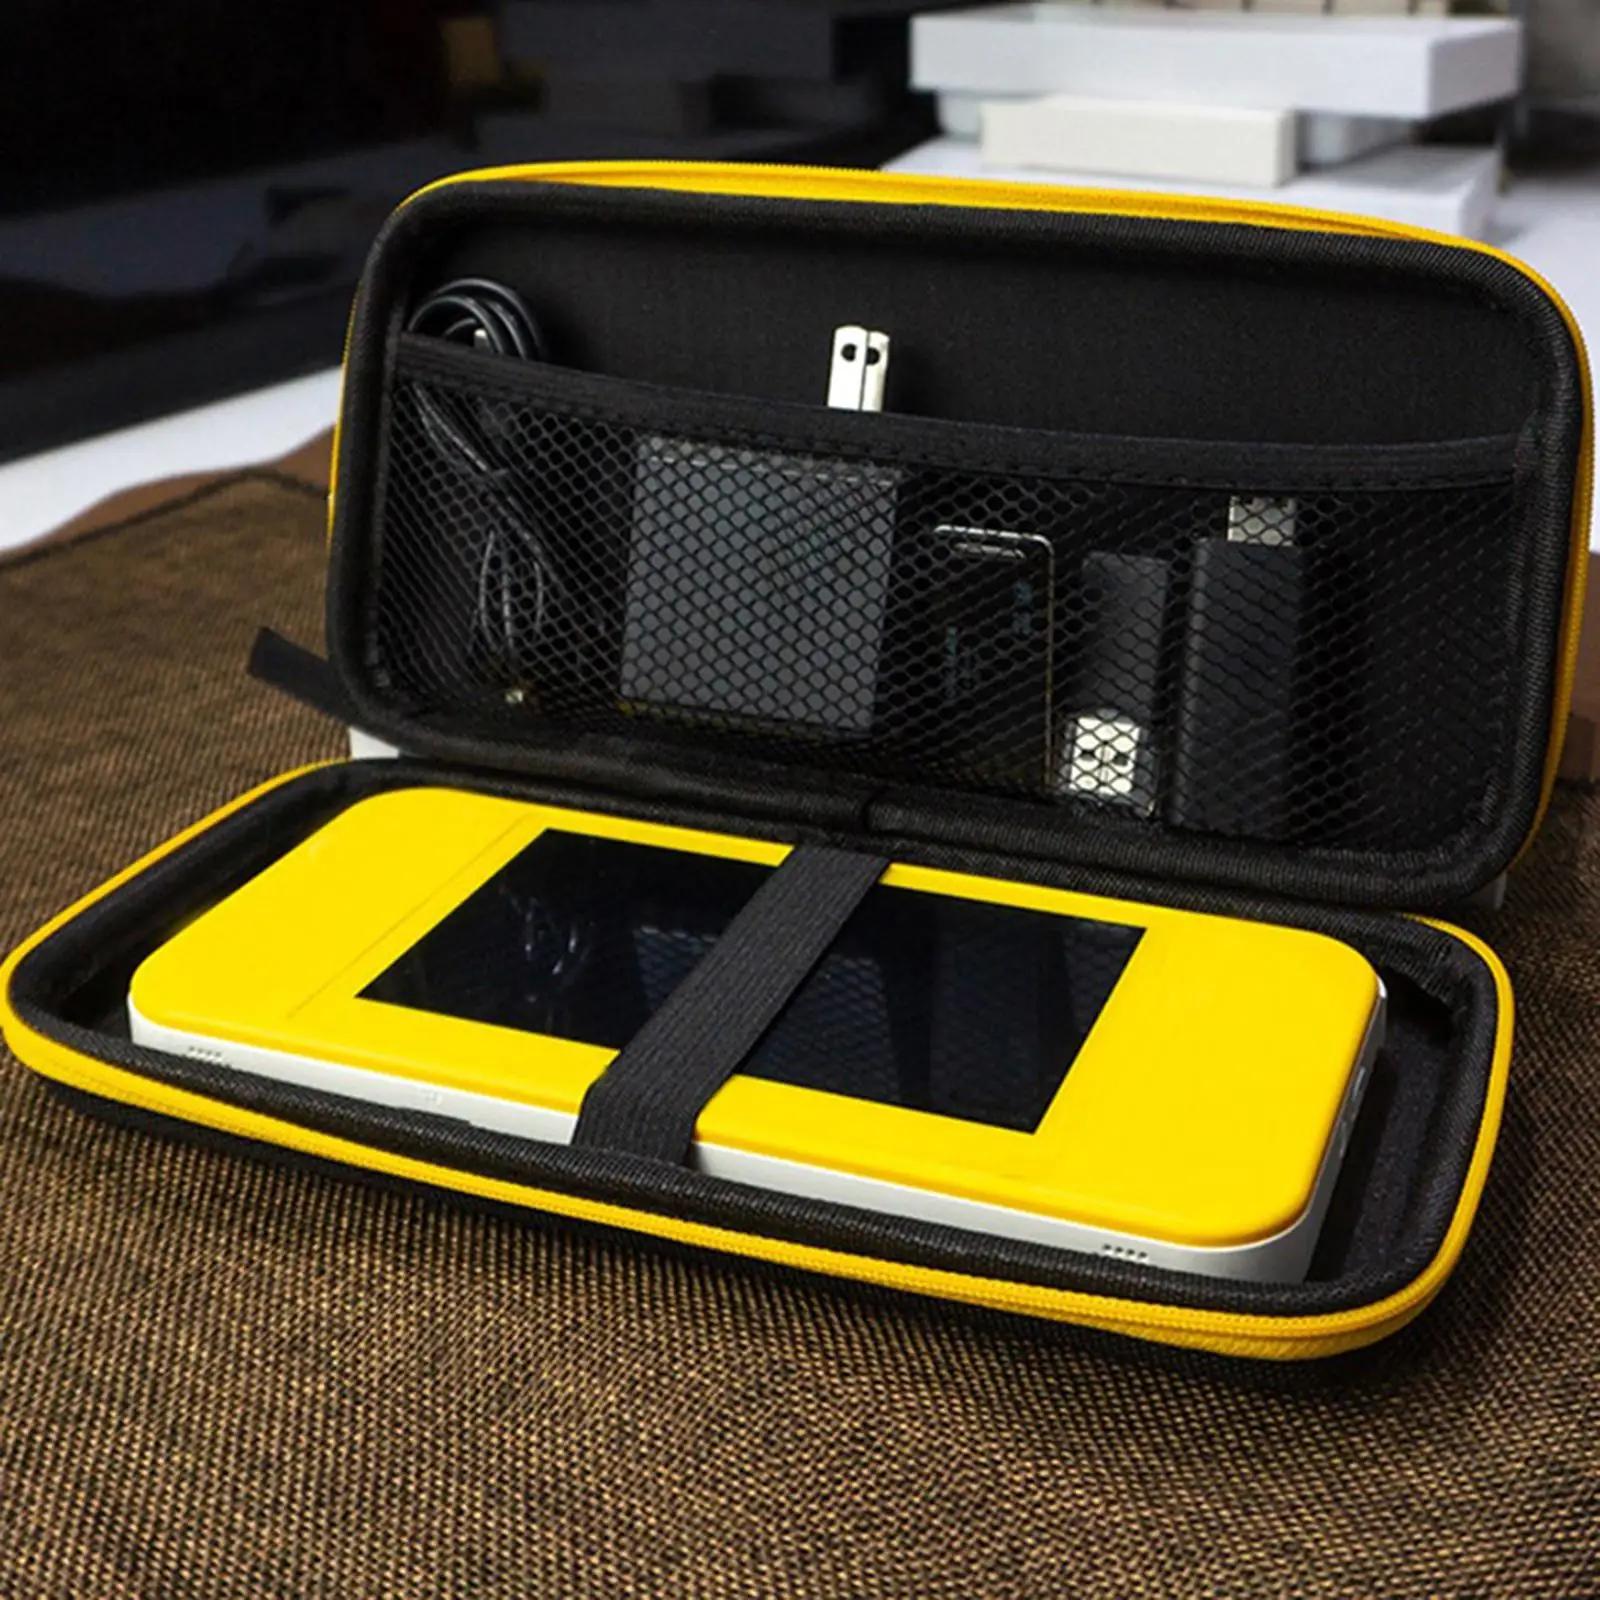 Shockproof Carrying Case Screen Protect Organizer Bag Dustproof Portable Hard Shell Accessories for Pocket 3 Game Console